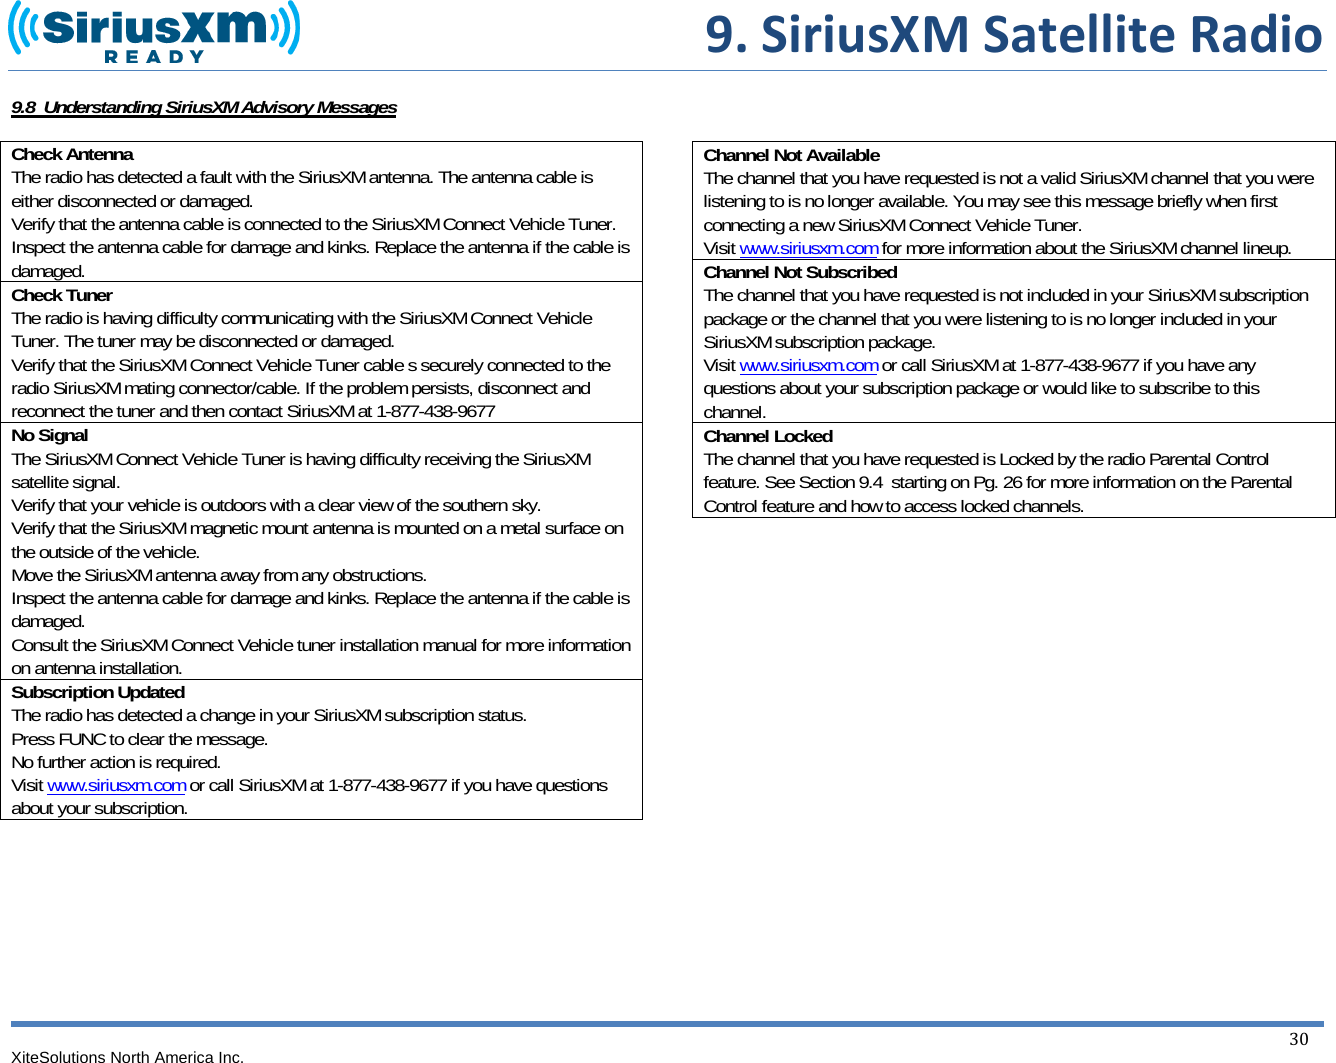  9.SiriusXMSatelliteRadioXiteSolutions North America Inc.  30 9.8  Understanding SiriusXM Advisory Messages  Check Antenna The radio has detected a fault with the SiriusXM antenna. The antenna cable is either disconnected or damaged.  Verify that the antenna cable is connected to the SiriusXM Connect Vehicle Tuner. Inspect the antenna cable for damage and kinks. Replace the antenna if the cable is damaged. Check Tuner The radio is having difficulty communicating with the SiriusXM Connect Vehicle Tuner. The tuner may be disconnected or damaged.  Verify that the SiriusXM Connect Vehicle Tuner cable s securely connected to the radio SiriusXM mating connector/cable. If the problem persists, disconnect and reconnect the tuner and then contact SiriusXM at 1-877-438-9677 No Signal The SiriusXM Connect Vehicle Tuner is having difficulty receiving the SiriusXM satellite signal. Verify that your vehicle is outdoors with a clear view of the southern sky. Verify that the SiriusXM magnetic mount antenna is mounted on a metal surface on the outside of the vehicle. Move the SiriusXM antenna away from any obstructions. Inspect the antenna cable for damage and kinks. Replace the antenna if the cable is damaged. Consult the SiriusXM Connect Vehicle tuner installation manual for more information on antenna installation. Subscription Updated The radio has detected a change in your SiriusXM subscription status. Press FUNC to clear the message. No further action is required. Visit www.siriusxm.com or call SiriusXM at 1-877-438-9677 if you have questions about your subscription.                     Channel Not Available  The channel that you have requested is not a valid SiriusXM channel that you were listening to is no longer available. You may see this message briefly when first connecting a new SiriusXM Connect Vehicle Tuner. Visit www.siriusxm.com for more information about the SiriusXM channel lineup. Channel Not Subscribed The channel that you have requested is not included in your SiriusXM subscription package or the channel that you were listening to is no longer included in your SiriusXM subscription package.  Visit www.siriusxm.com or call SiriusXM at 1-877-438-9677 if you have any questions about your subscription package or would like to subscribe to this channel. Channel Locked The channel that you have requested is Locked by the radio Parental Control feature. See Section 9.4  starting on Pg. 26 for more information on the Parental Control feature and how to access locked channels. 